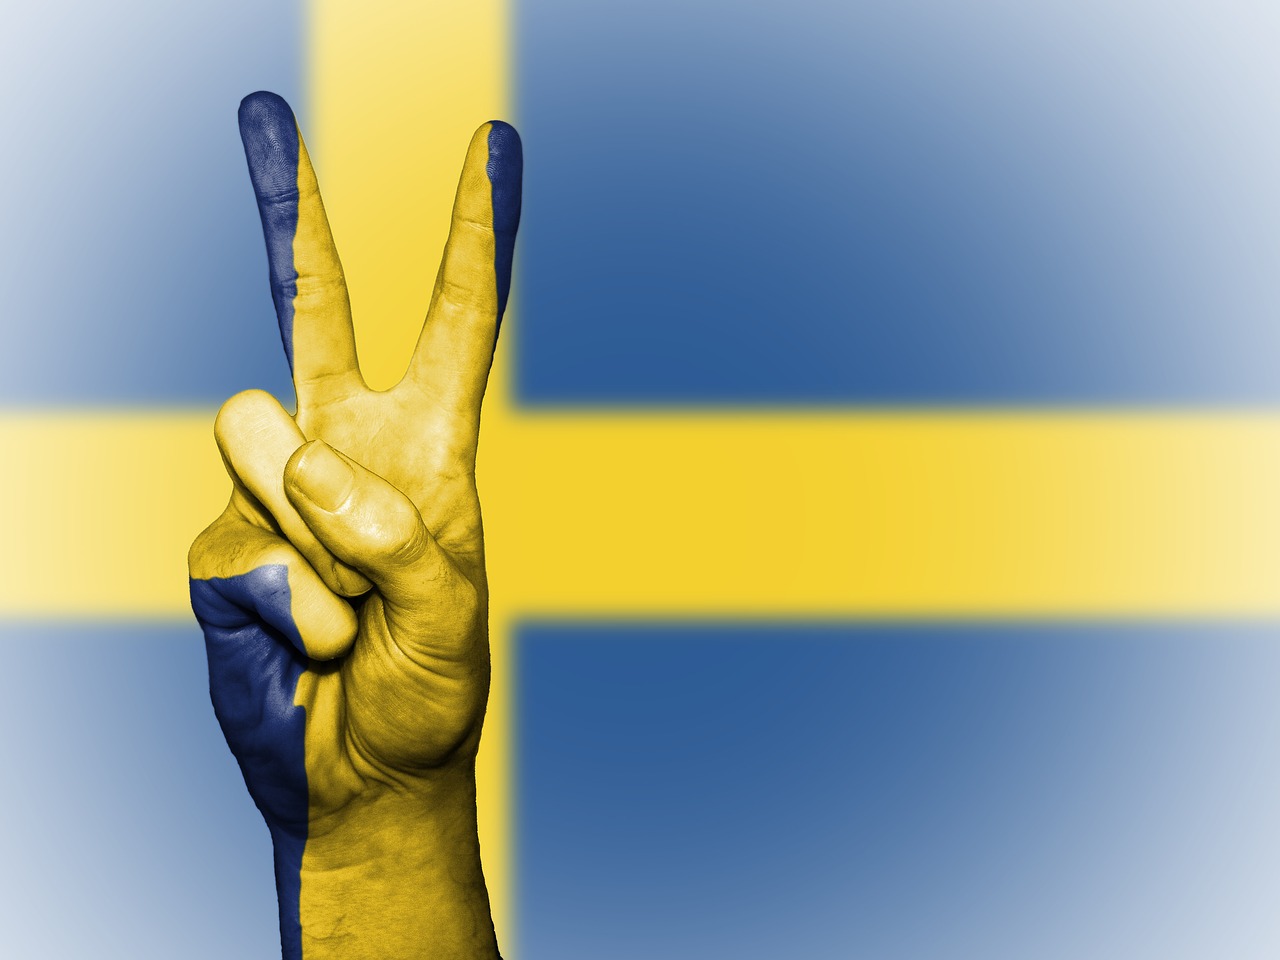 sweden peace hand free photo